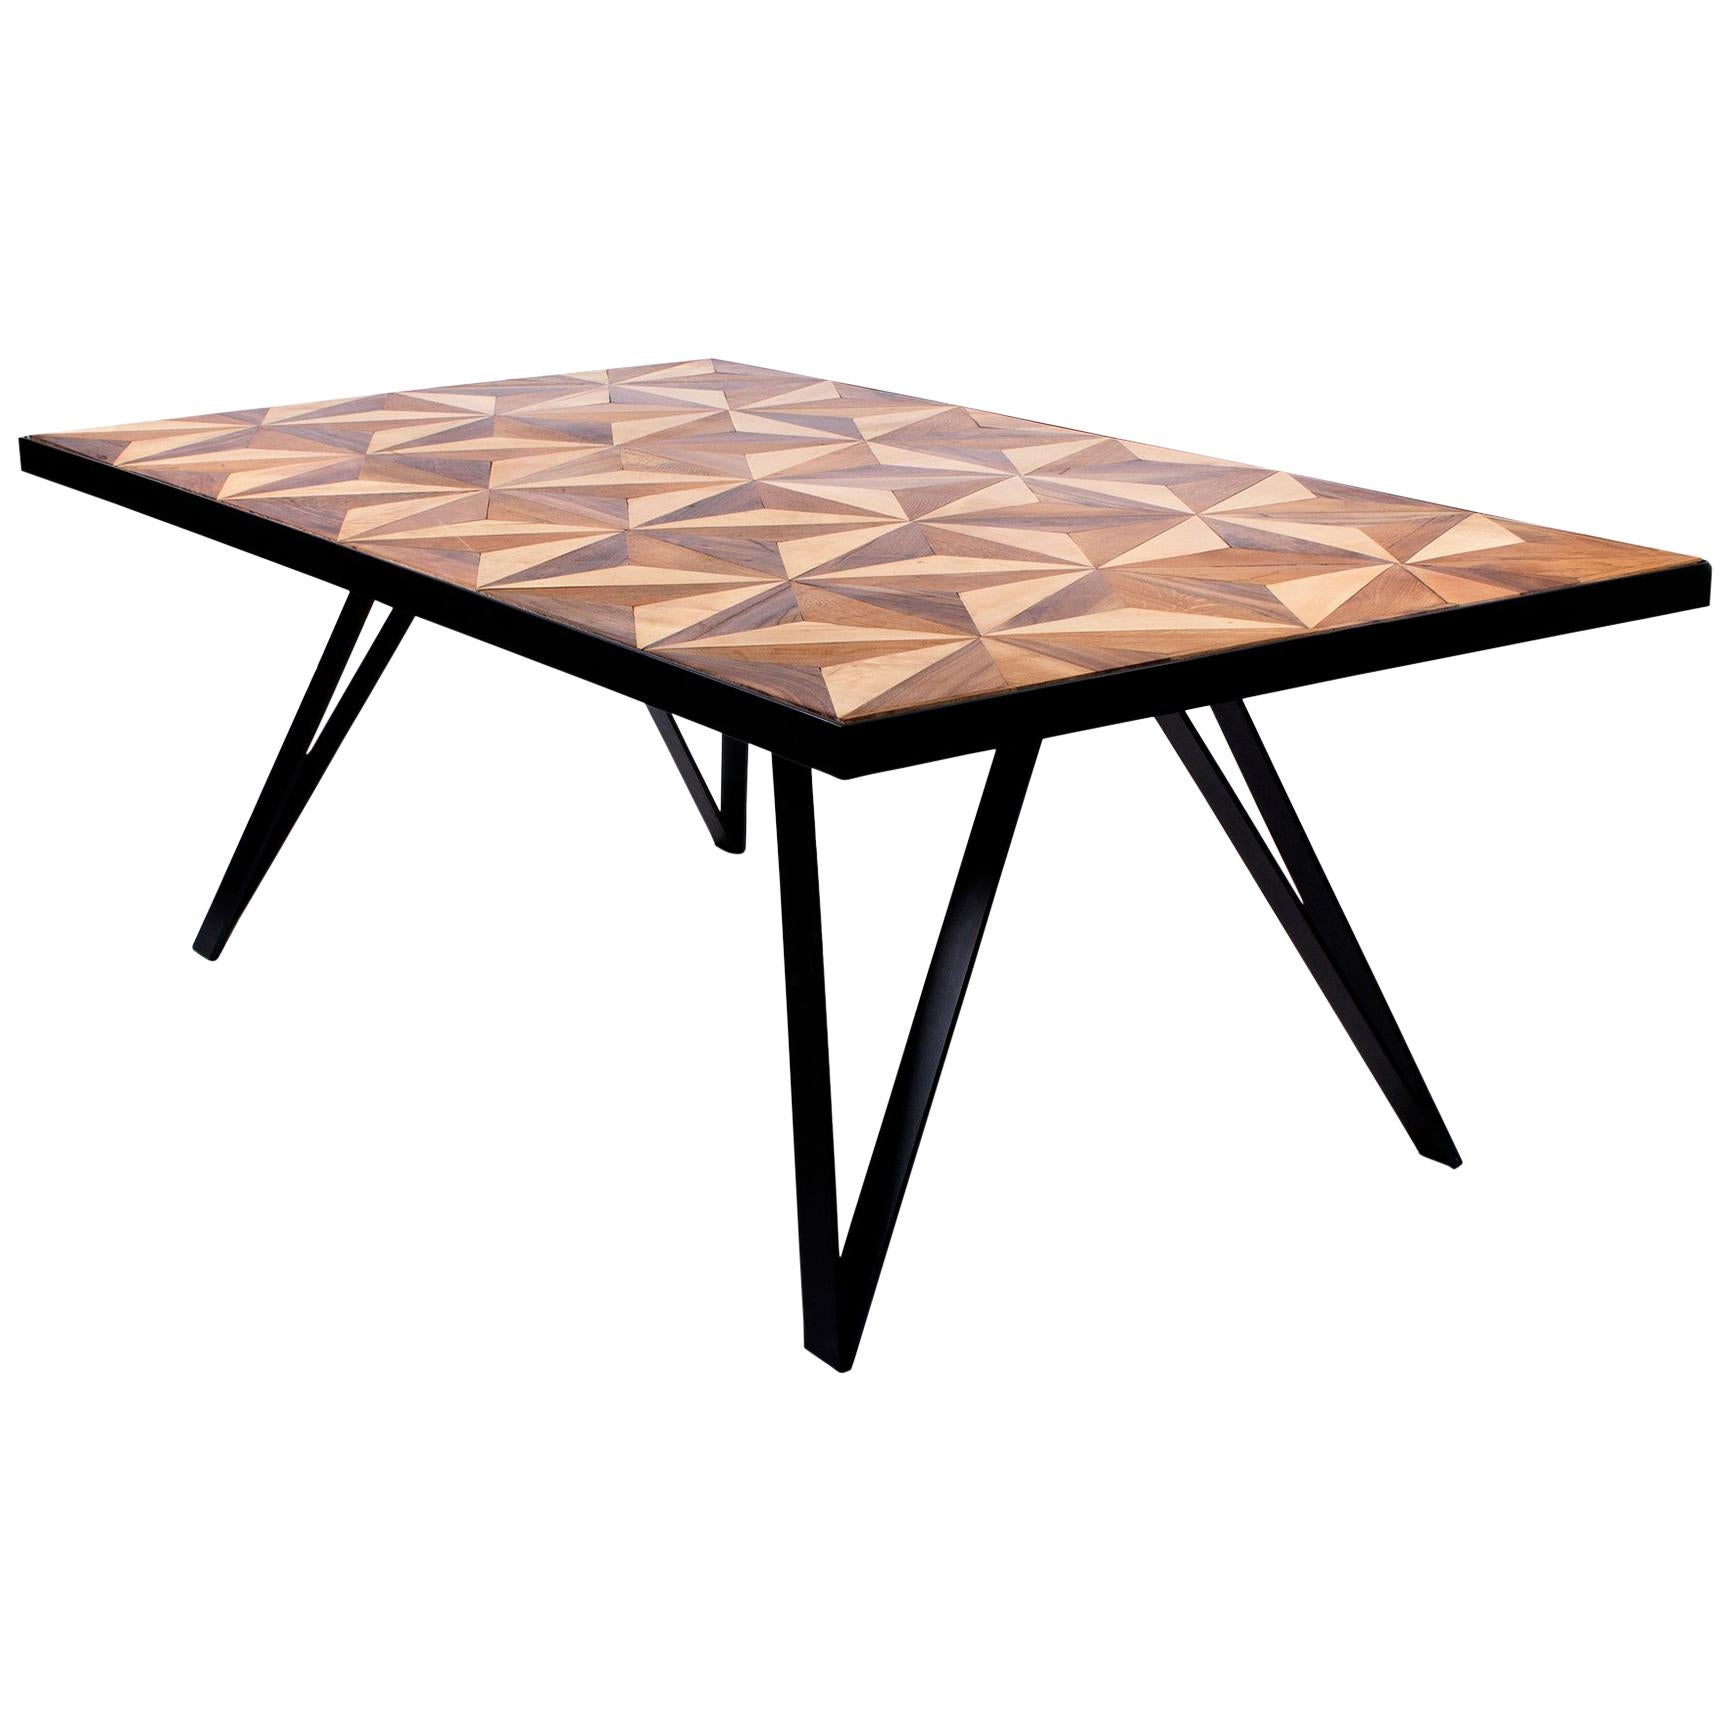 Four to the Floor, Limited Edition Table by Francois Gustin for Spolia For Sale